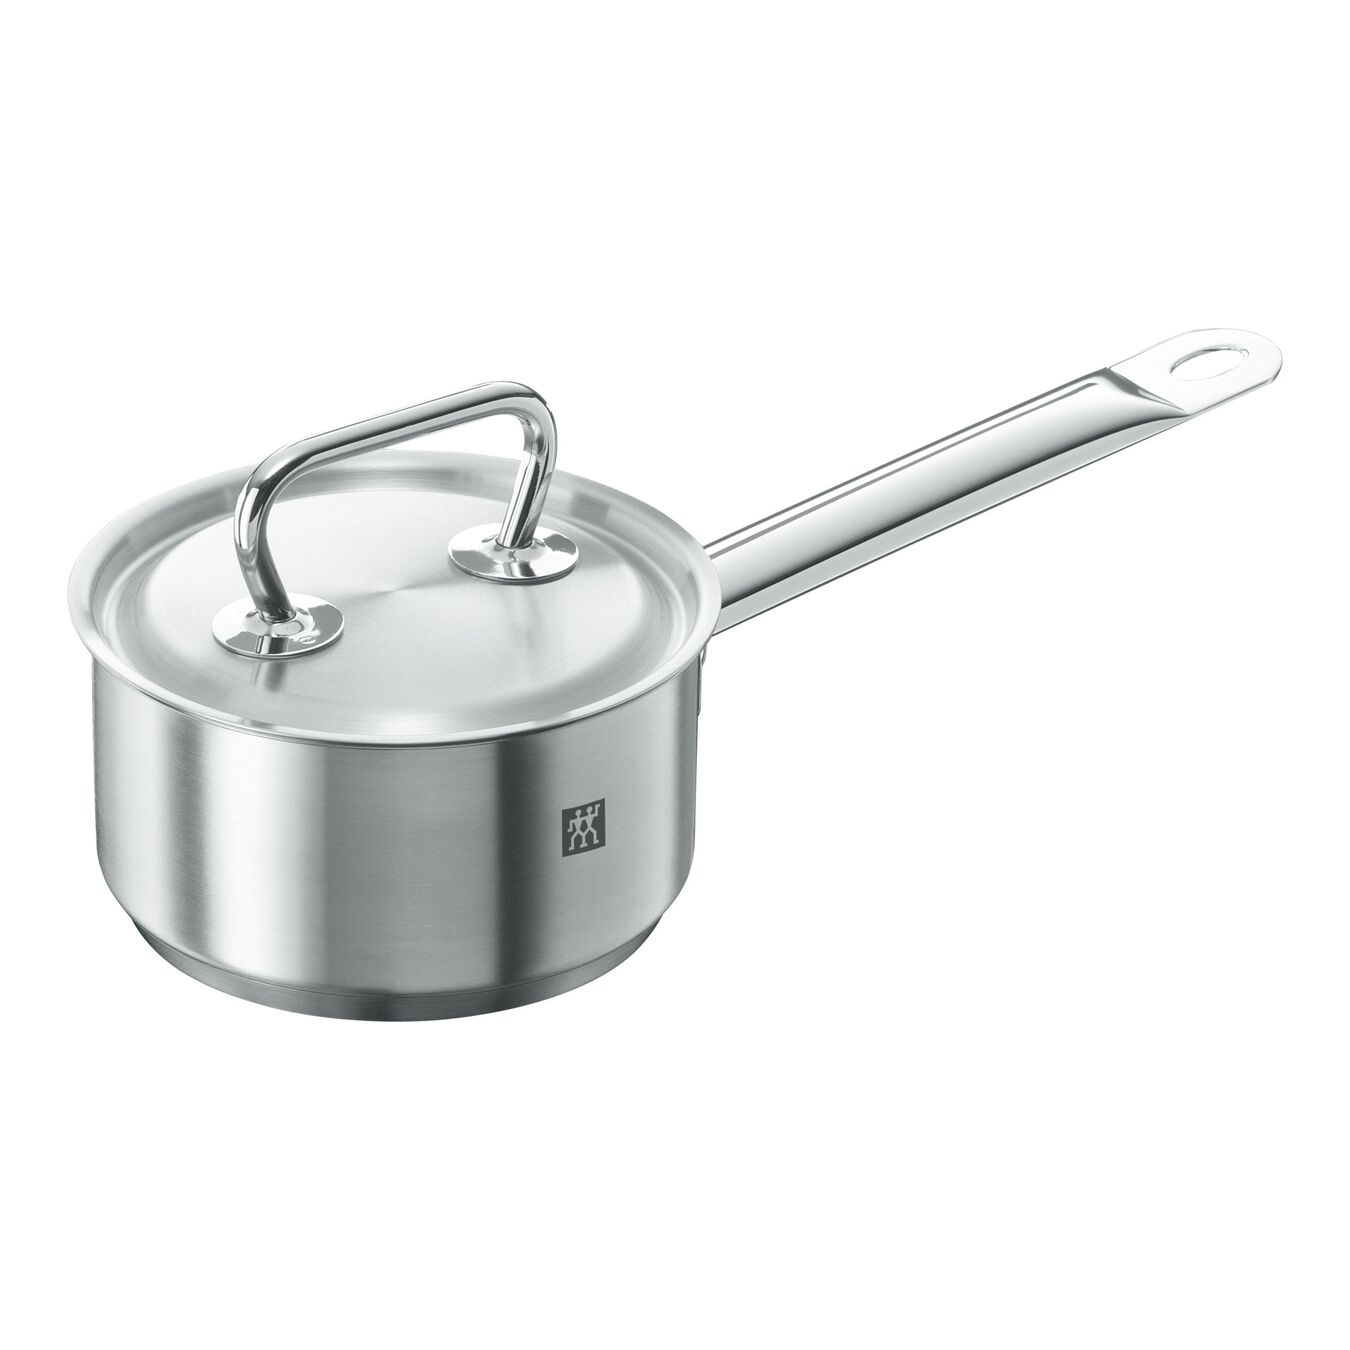 14 cm 18/10 Stainless Steel Saucepan silver,,large 1